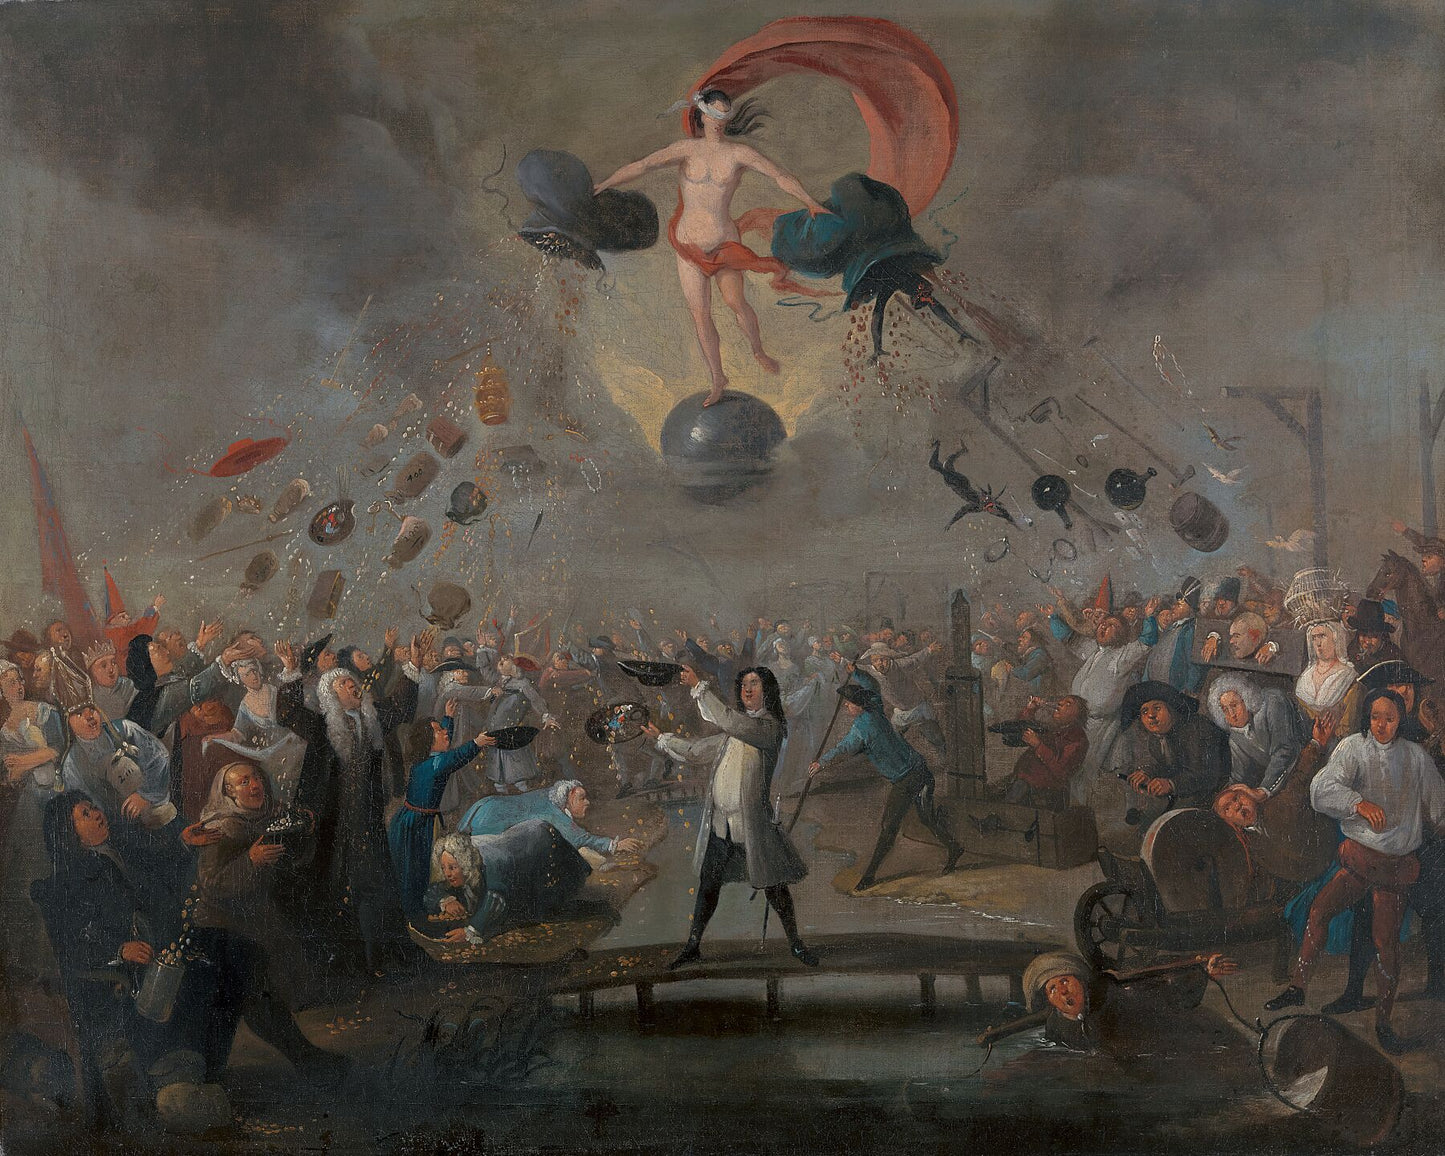 Balthazar Nebot, active 1730–1762, Spanish, active in Britain (from 1729), Allegory of Fortune, ca. 1730, Oil on canvas, Yale Center for British Art